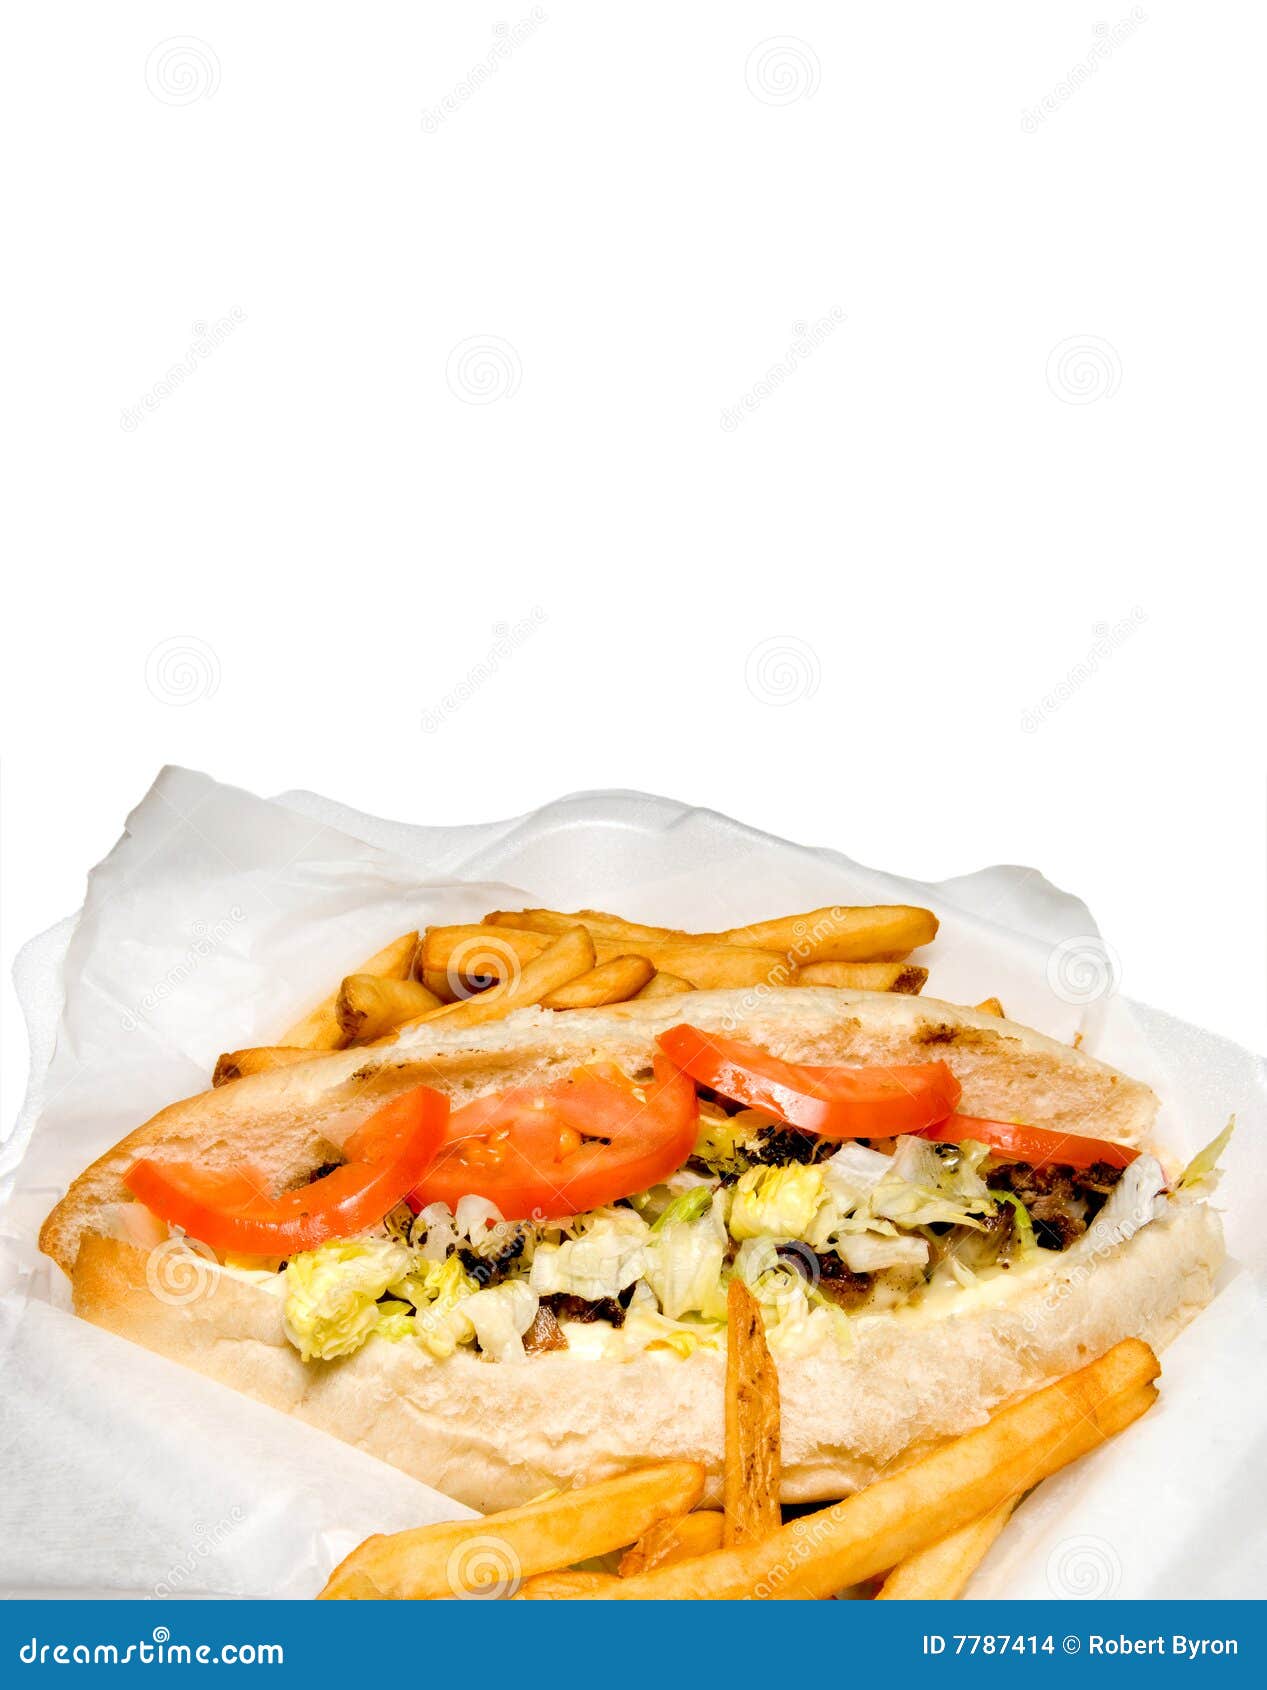 Philly Cheesesteak and French Fries Stock Photo - Image of healthy ...